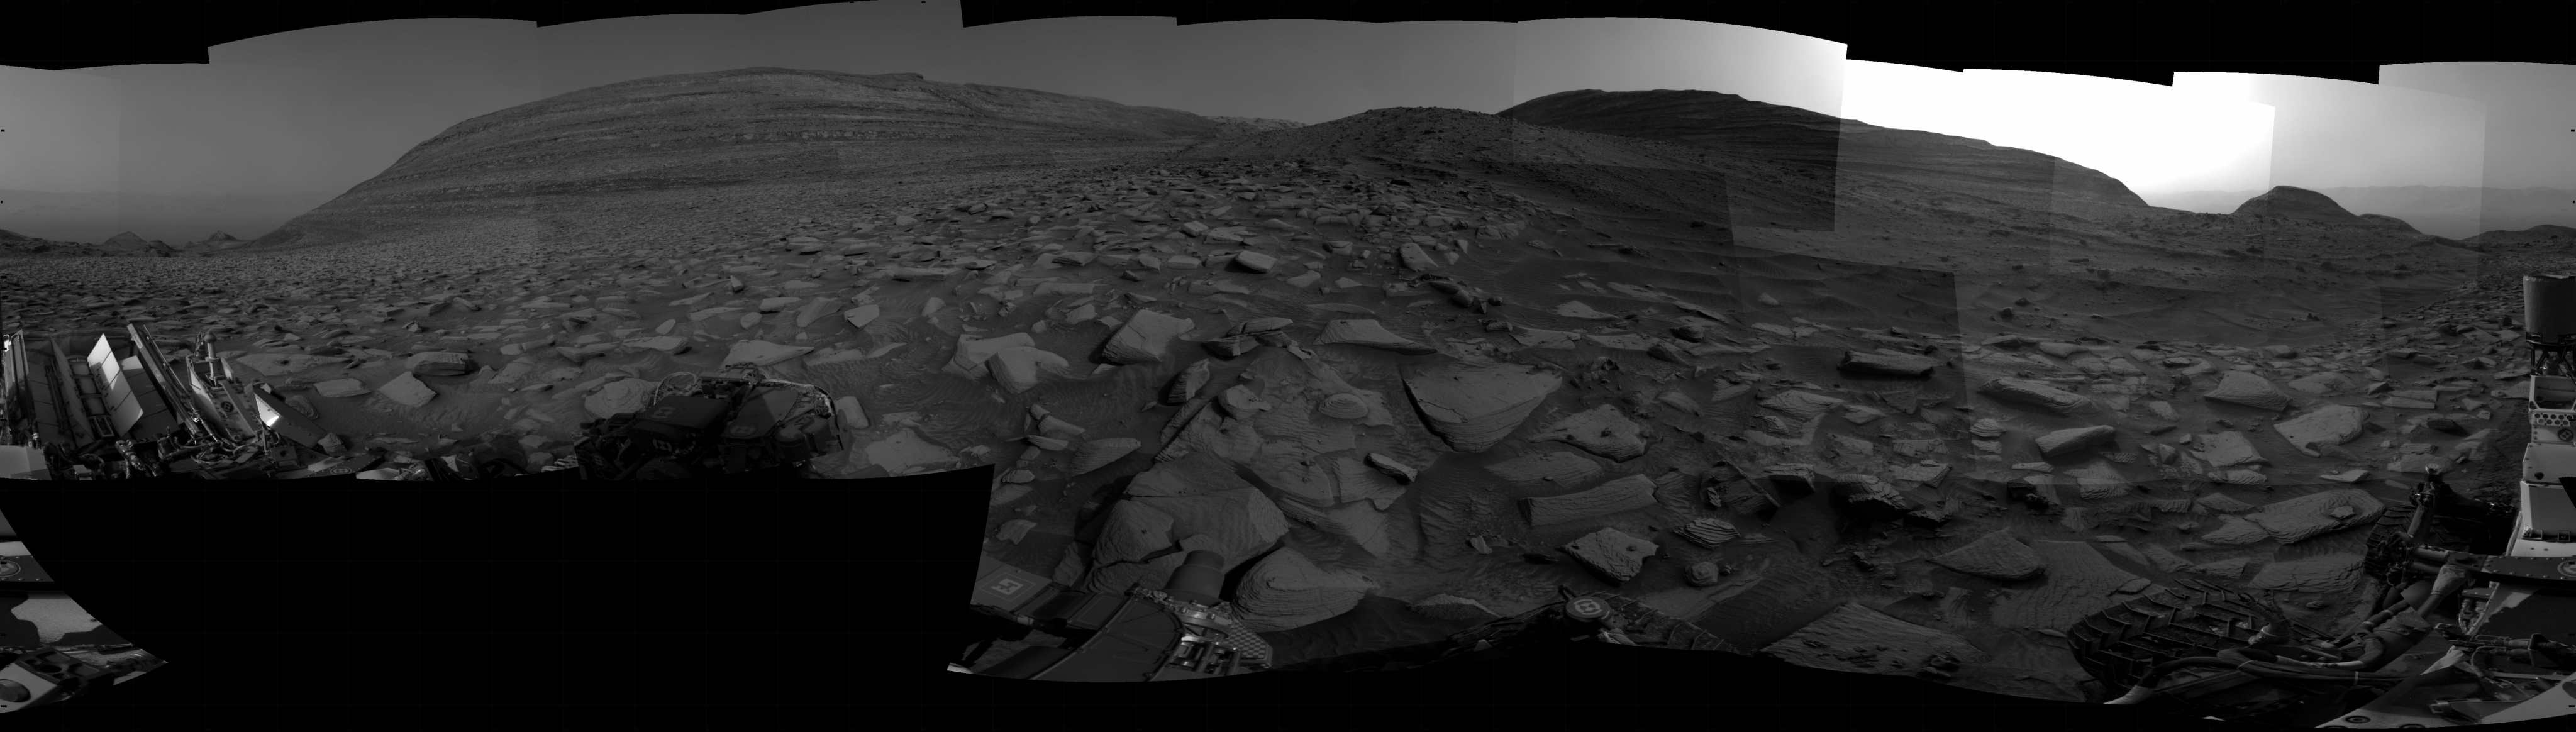 Curiosity took the images on April 19, 2024, Sol 4159 of the Mars Science Laboratory mission at drive 2692, site number 106. The local mean solar time for the image exposures was 3 PM.